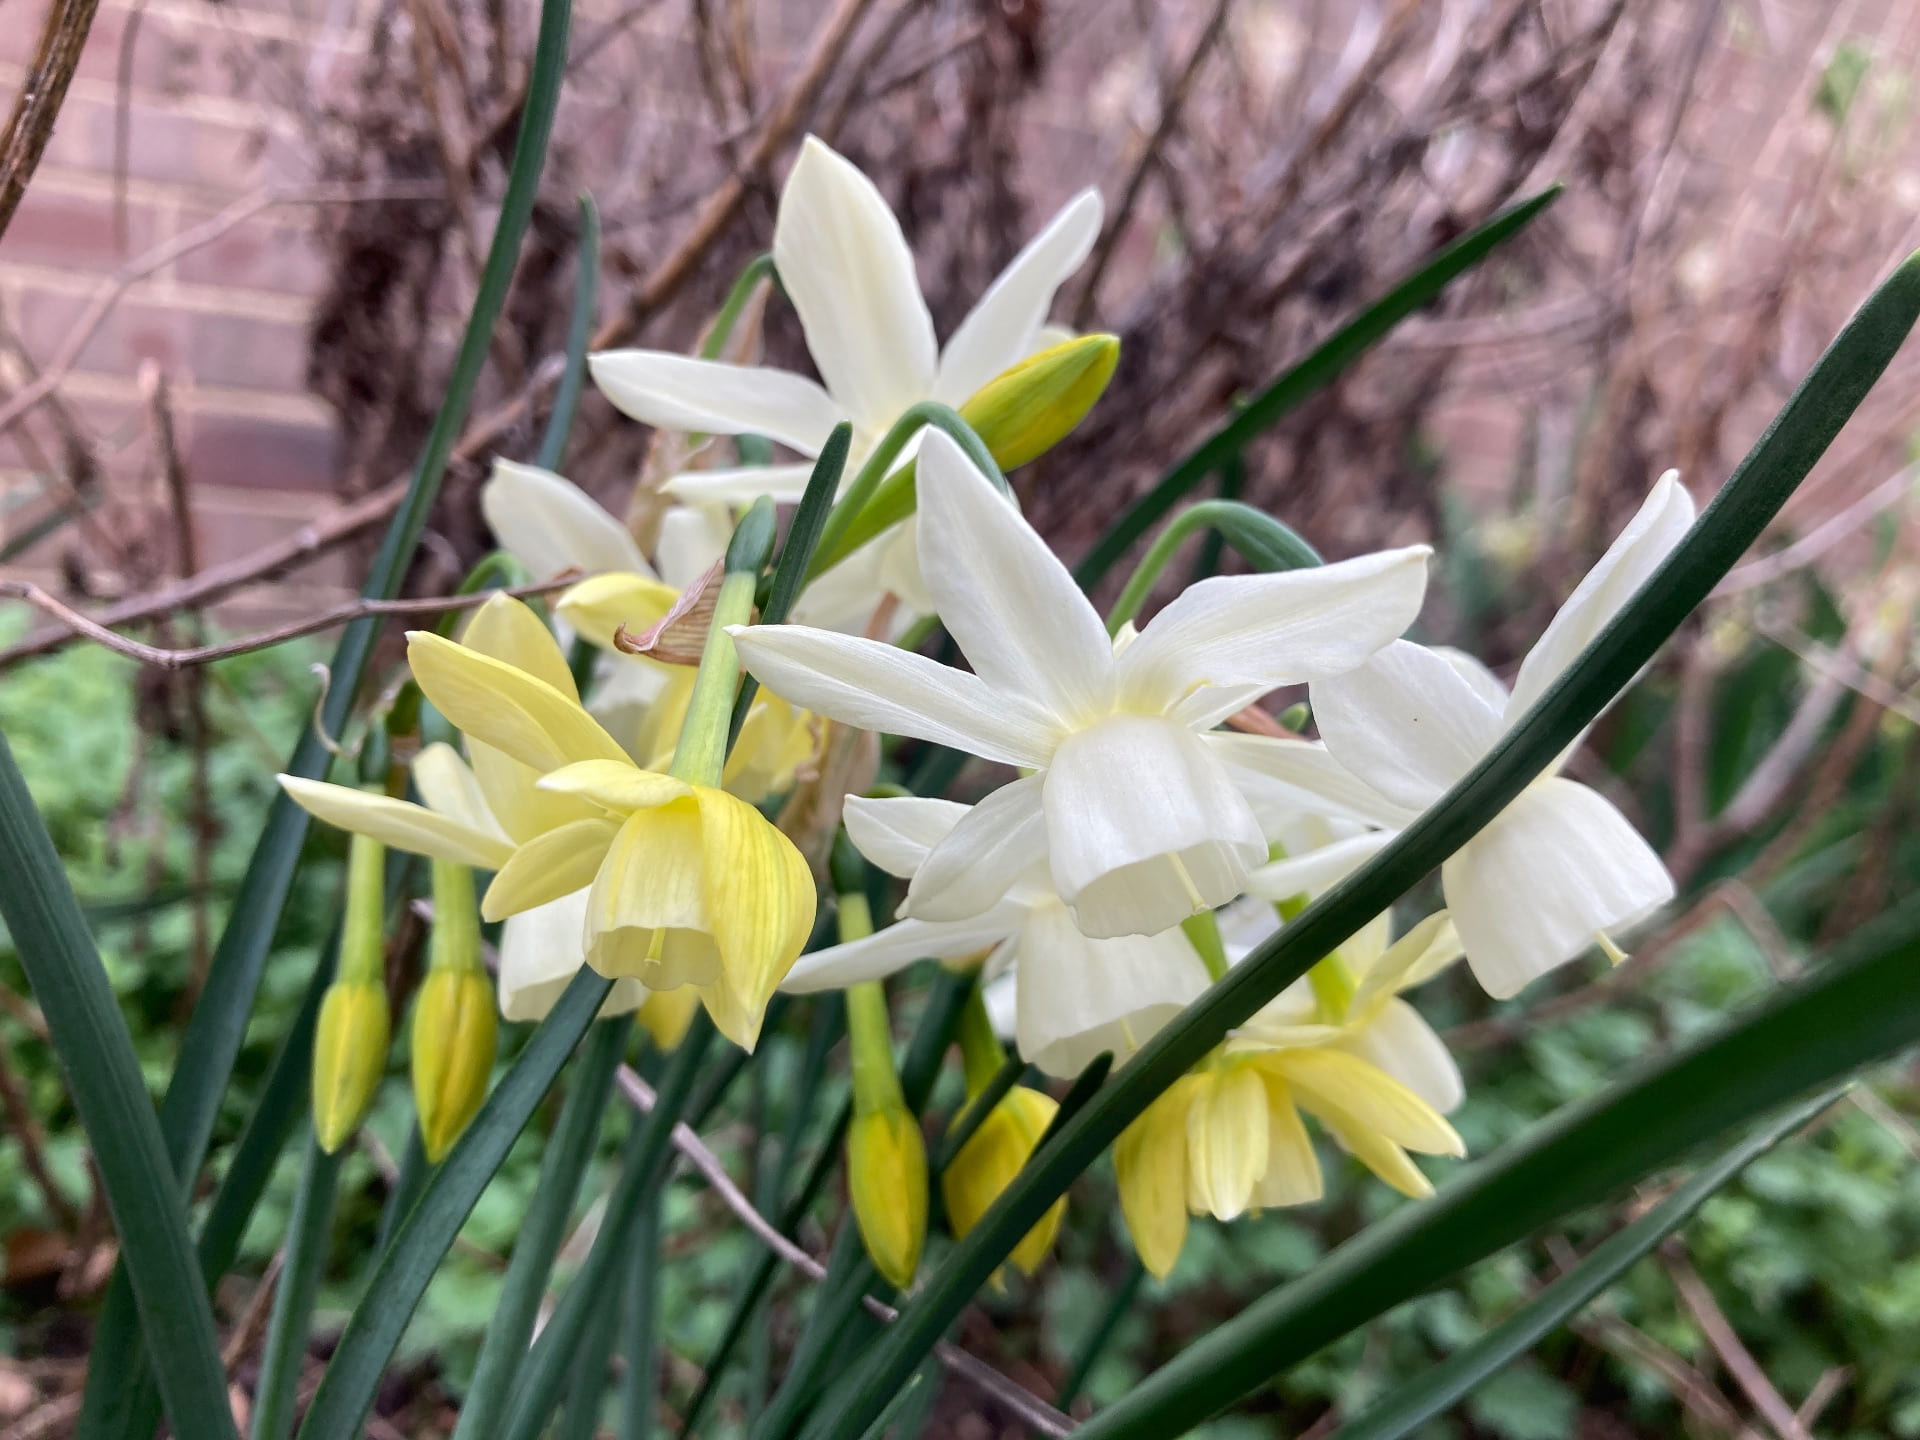 Flowers of Narcissus 'Moonlight Sensation' are a soft yellow when in bud, but become white with age.